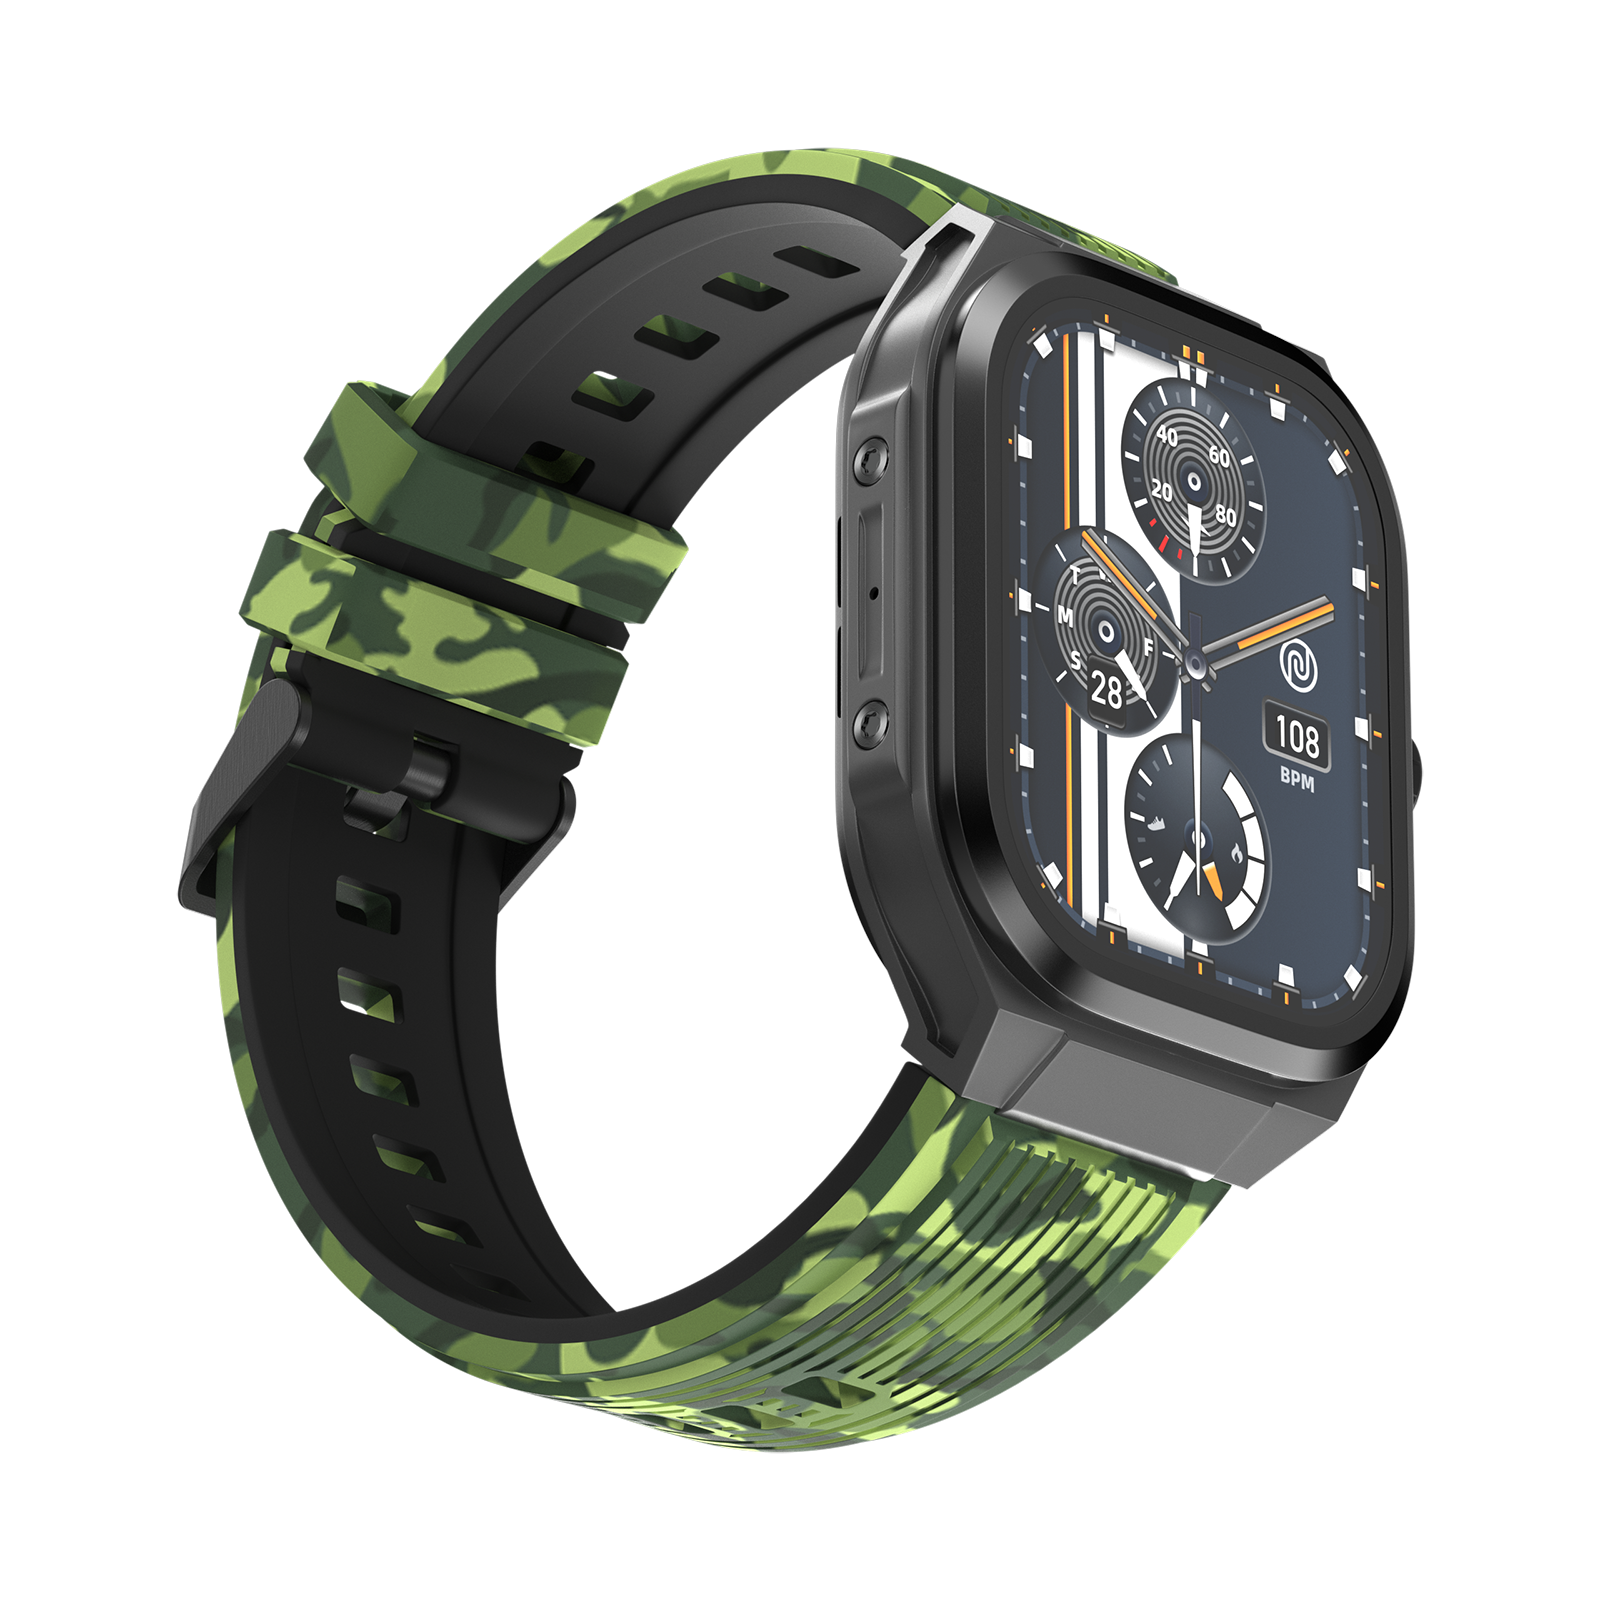 Buy noise ColorFit Thrill Smartwatch with Bluetooth Calling (50.8mm, 1.5ATM Water  Resistant, Camo Green Strap) online at best prices from Croma. Check  product details, reviews & more. Shop now!